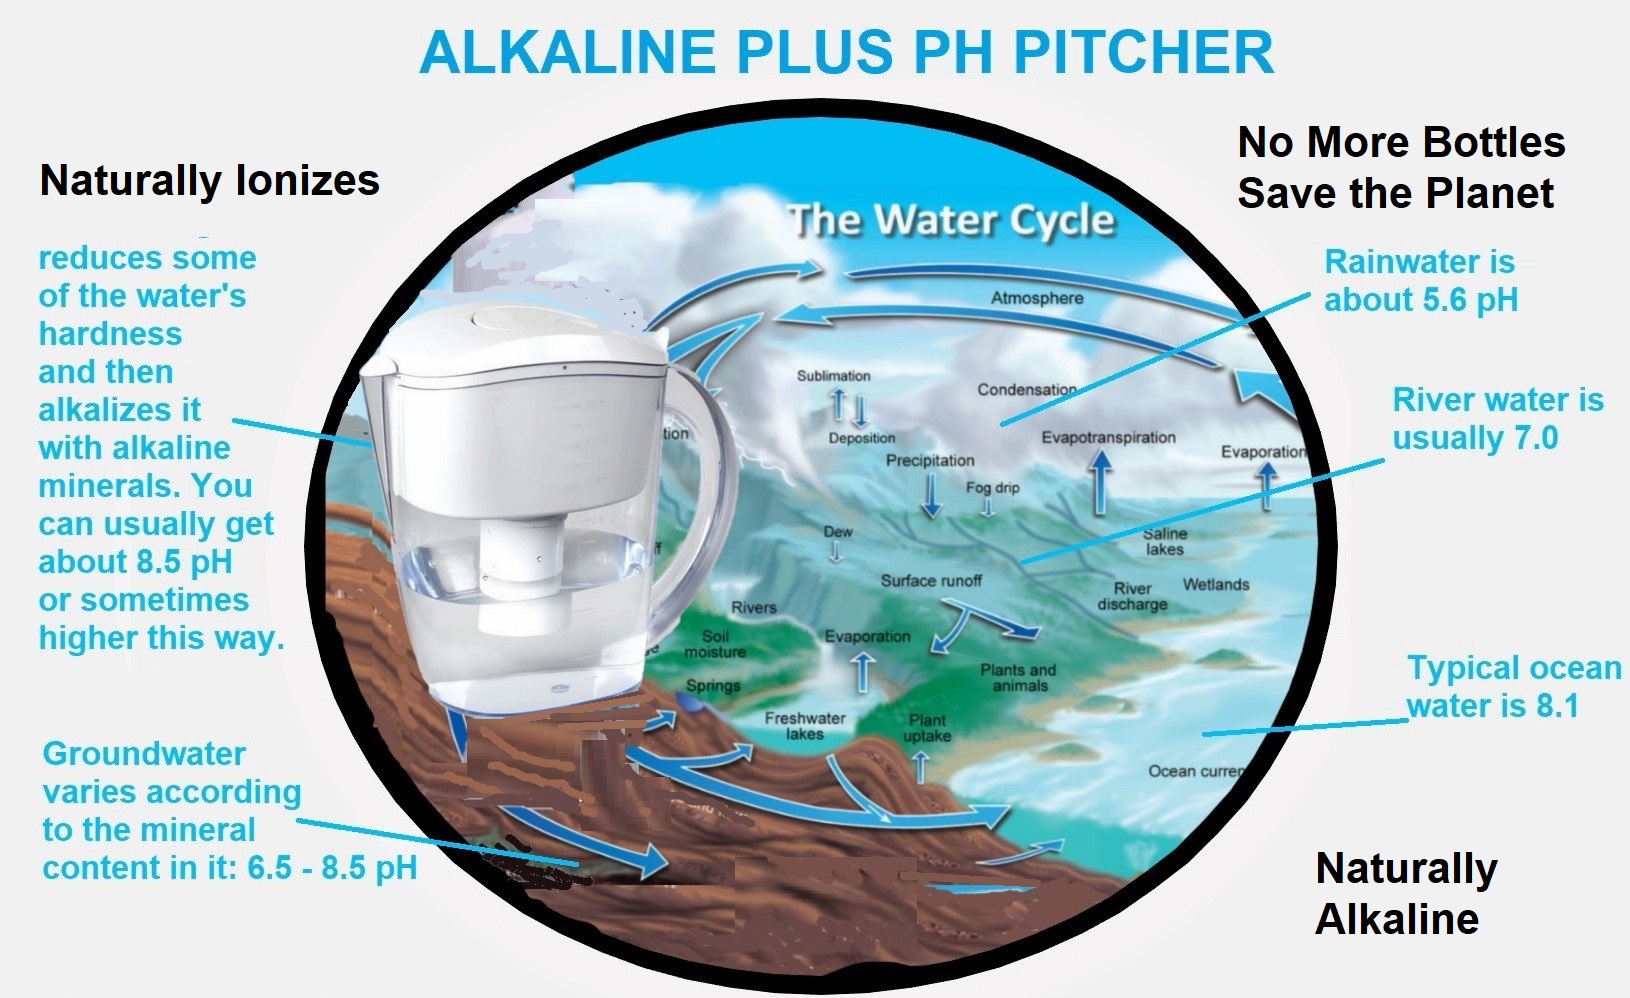 Introducing the Alkaline Plus PH Pitcher